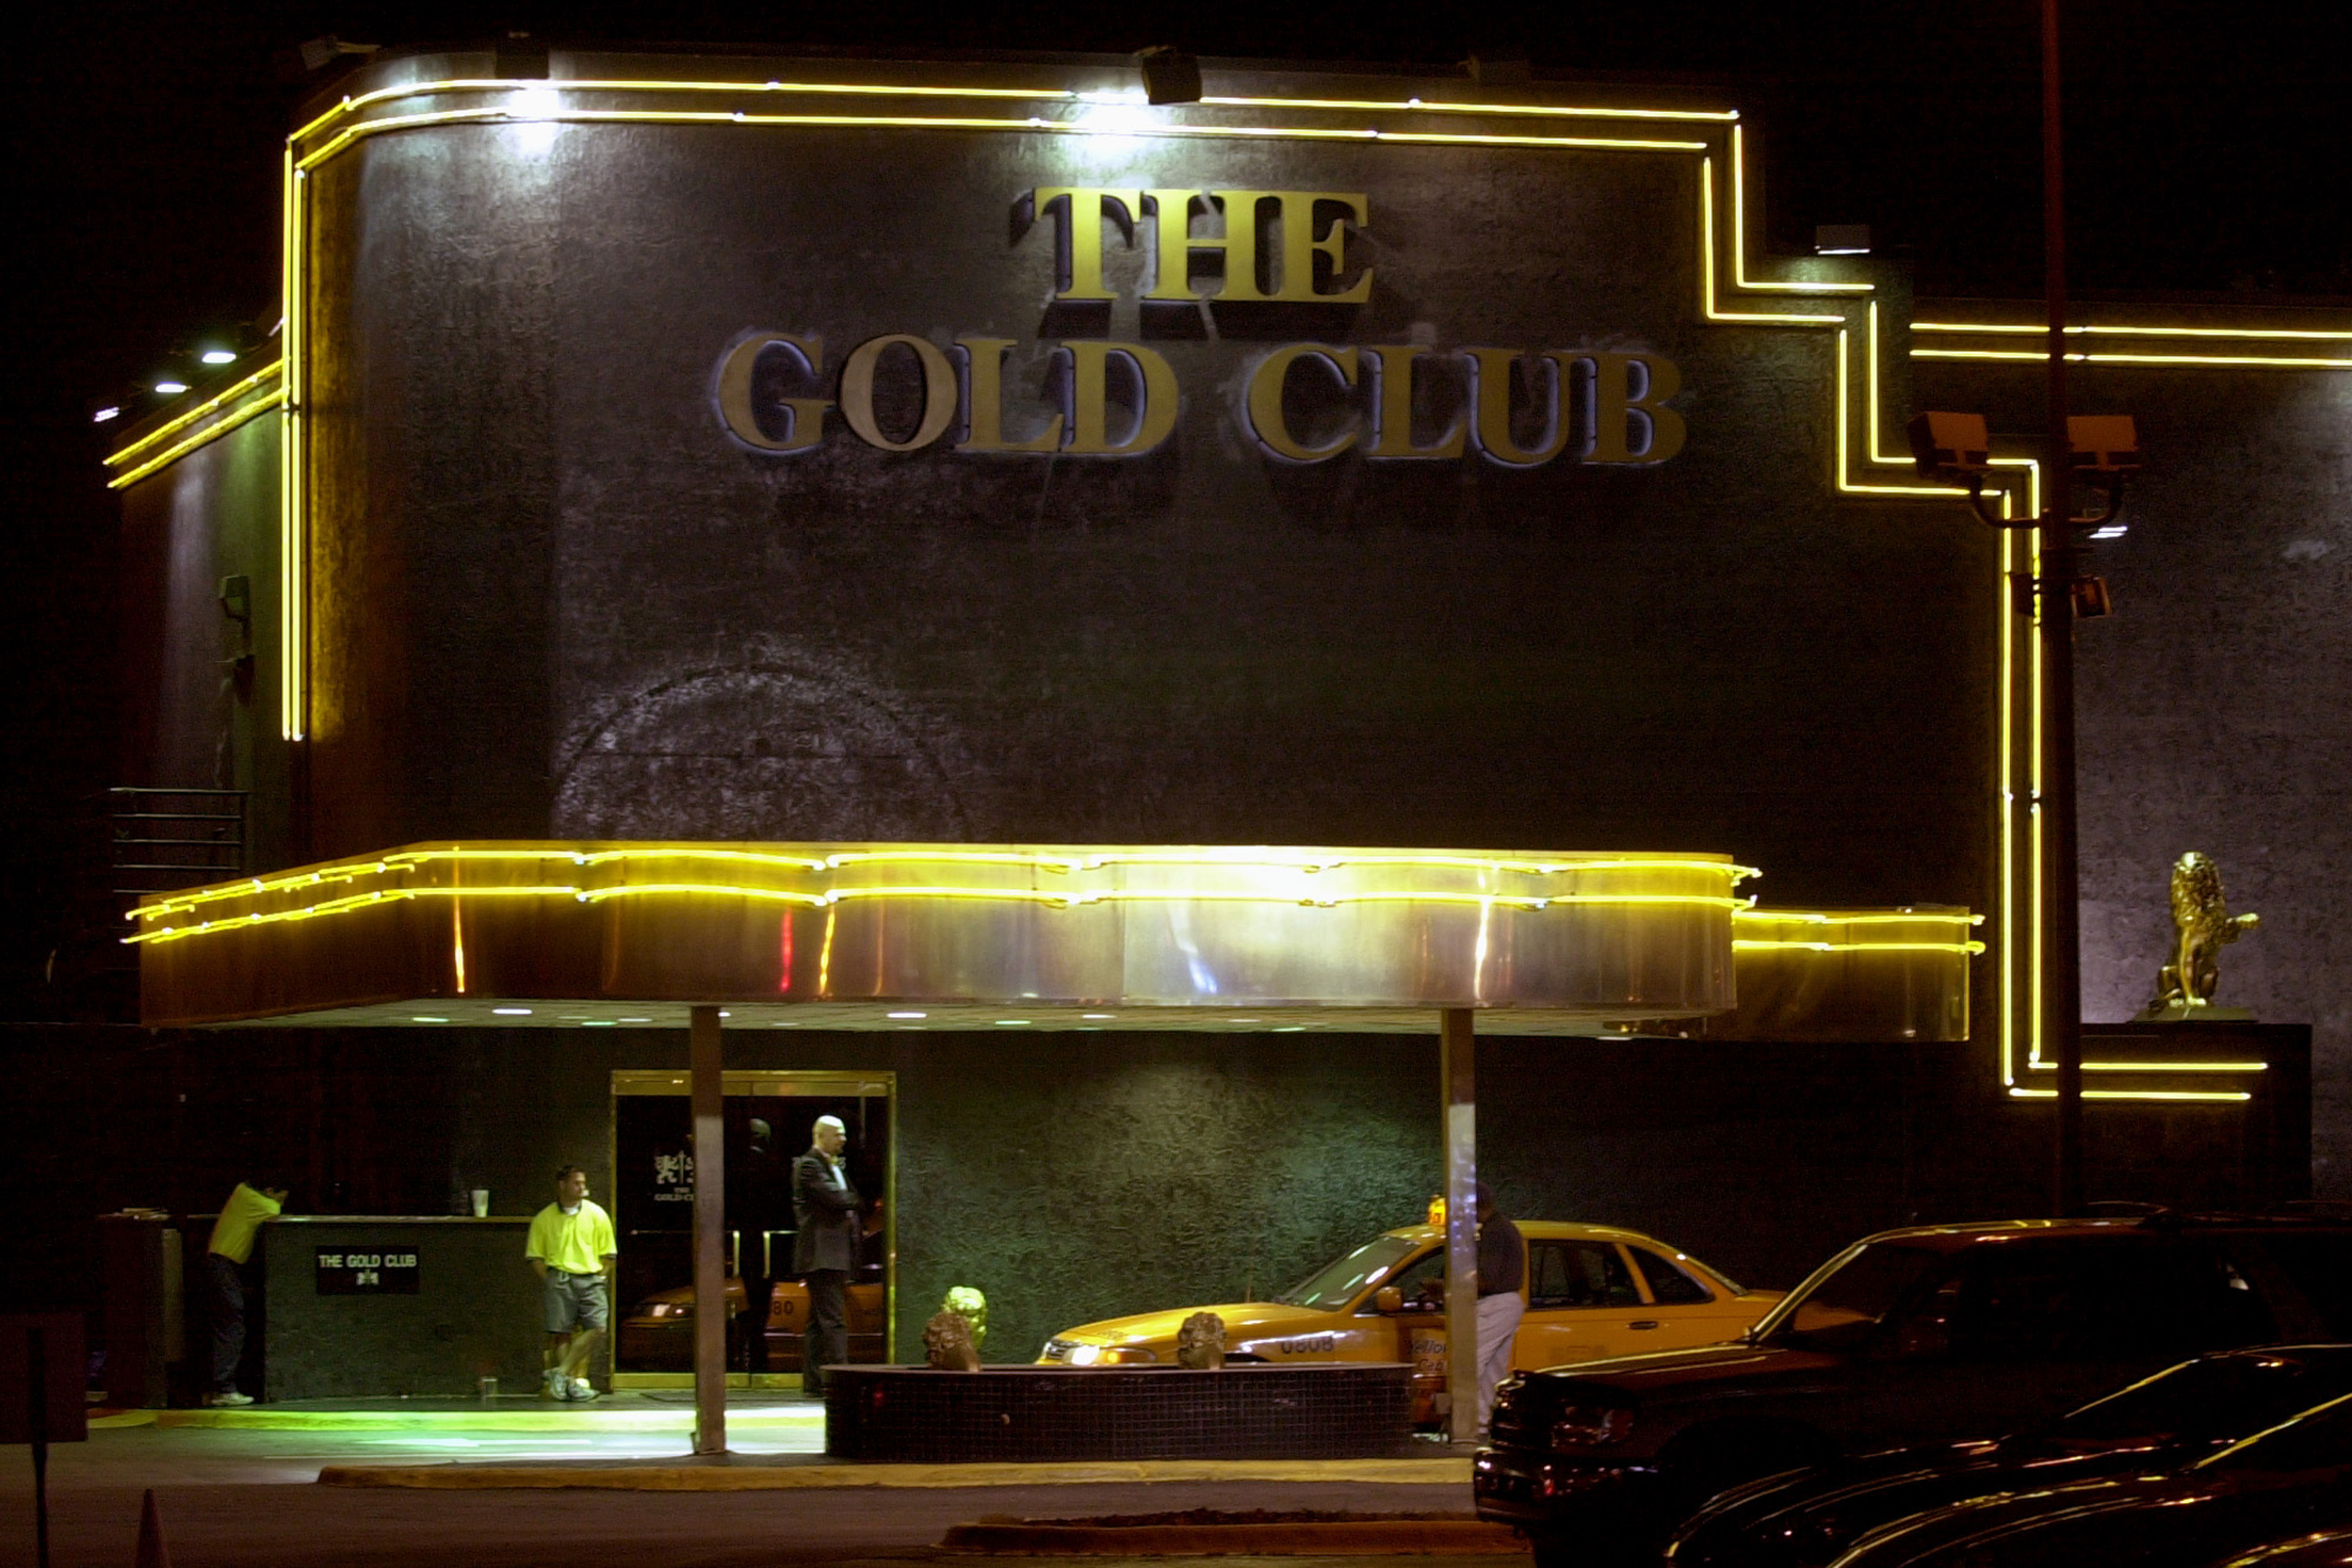 The outside of the Gold Club